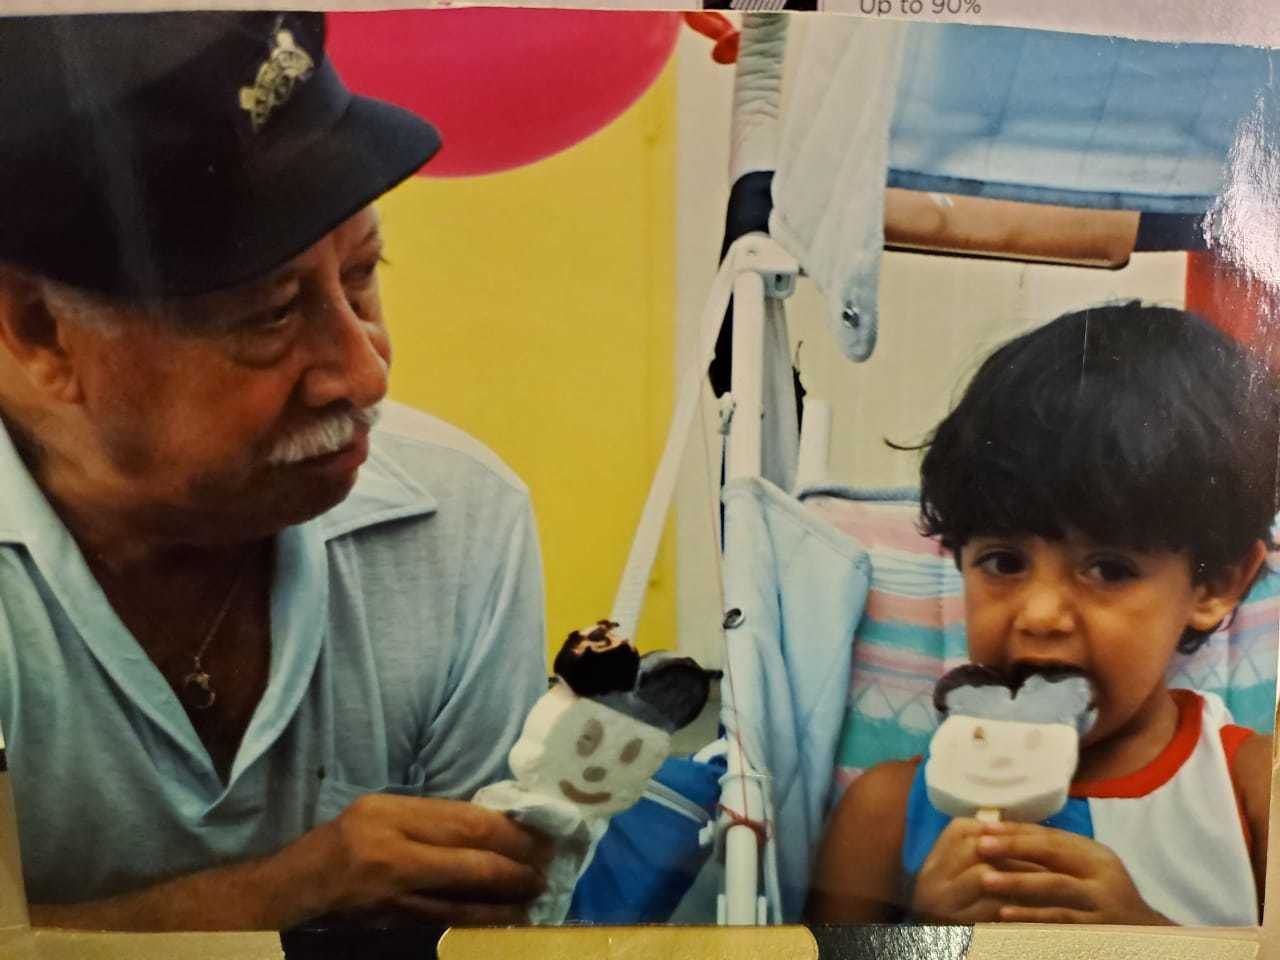 Carlos as a child eating icecream with an older gentleman.